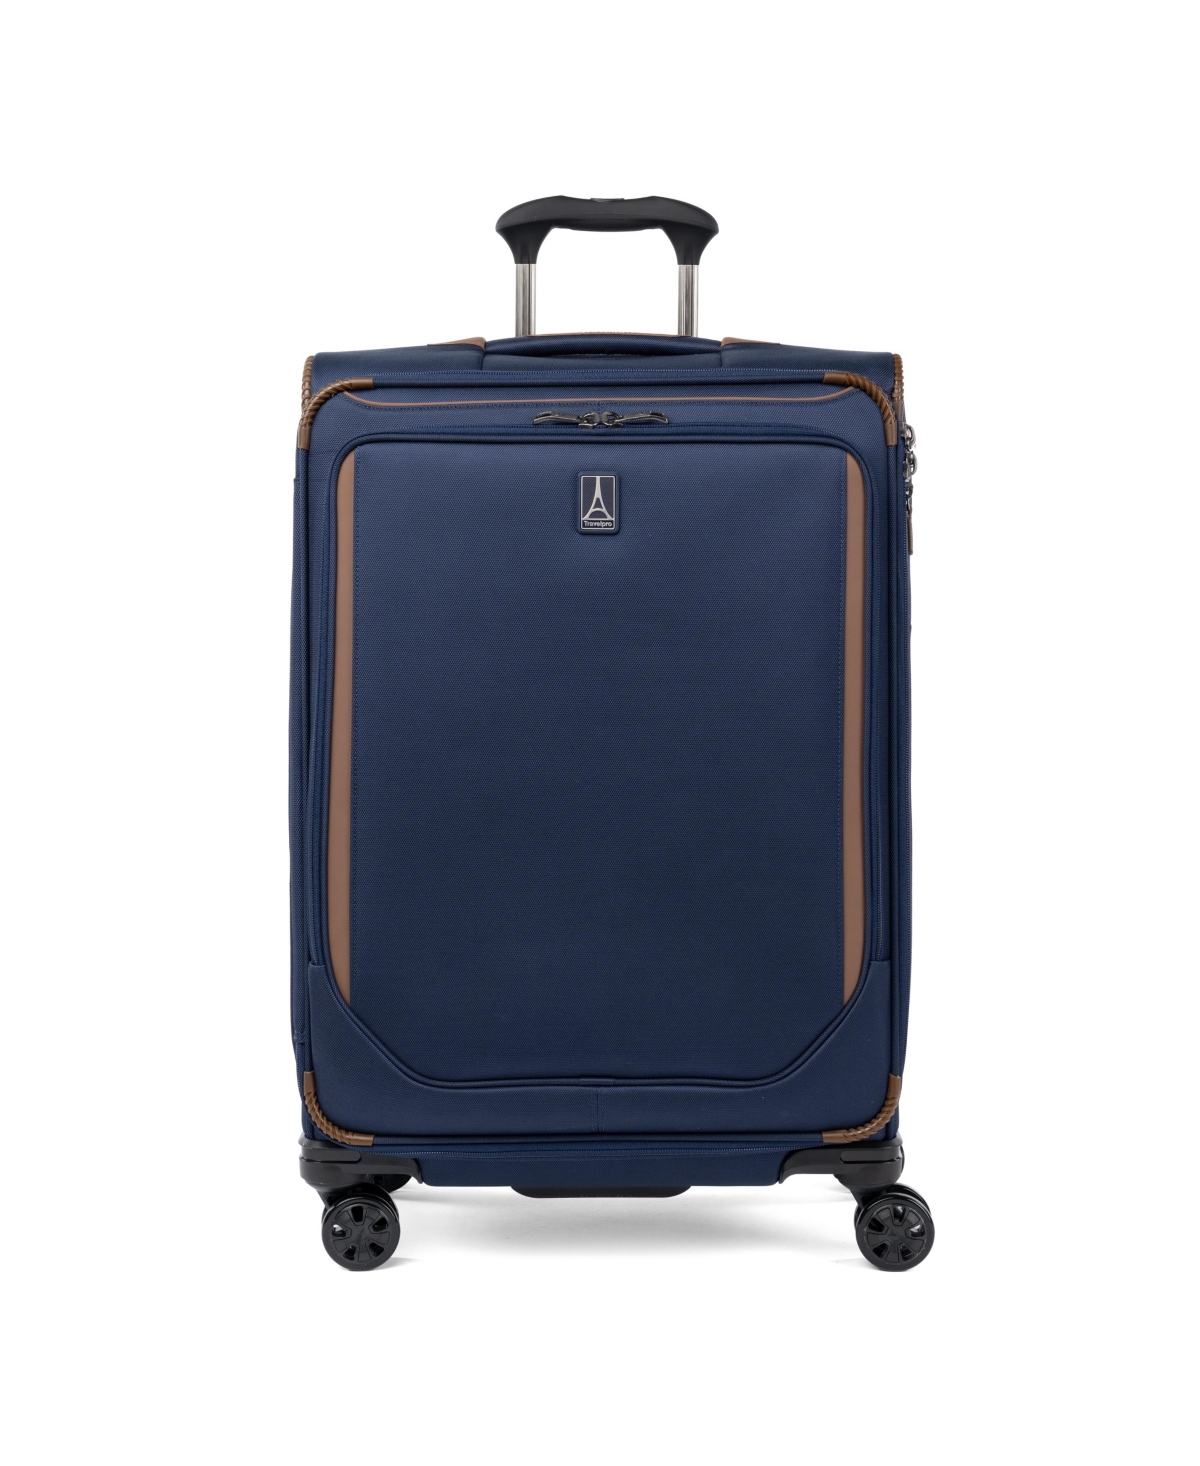 New! Travelpro Crew Classic Medium Check-in Expandable Spinner Luggage - Patriot Blue